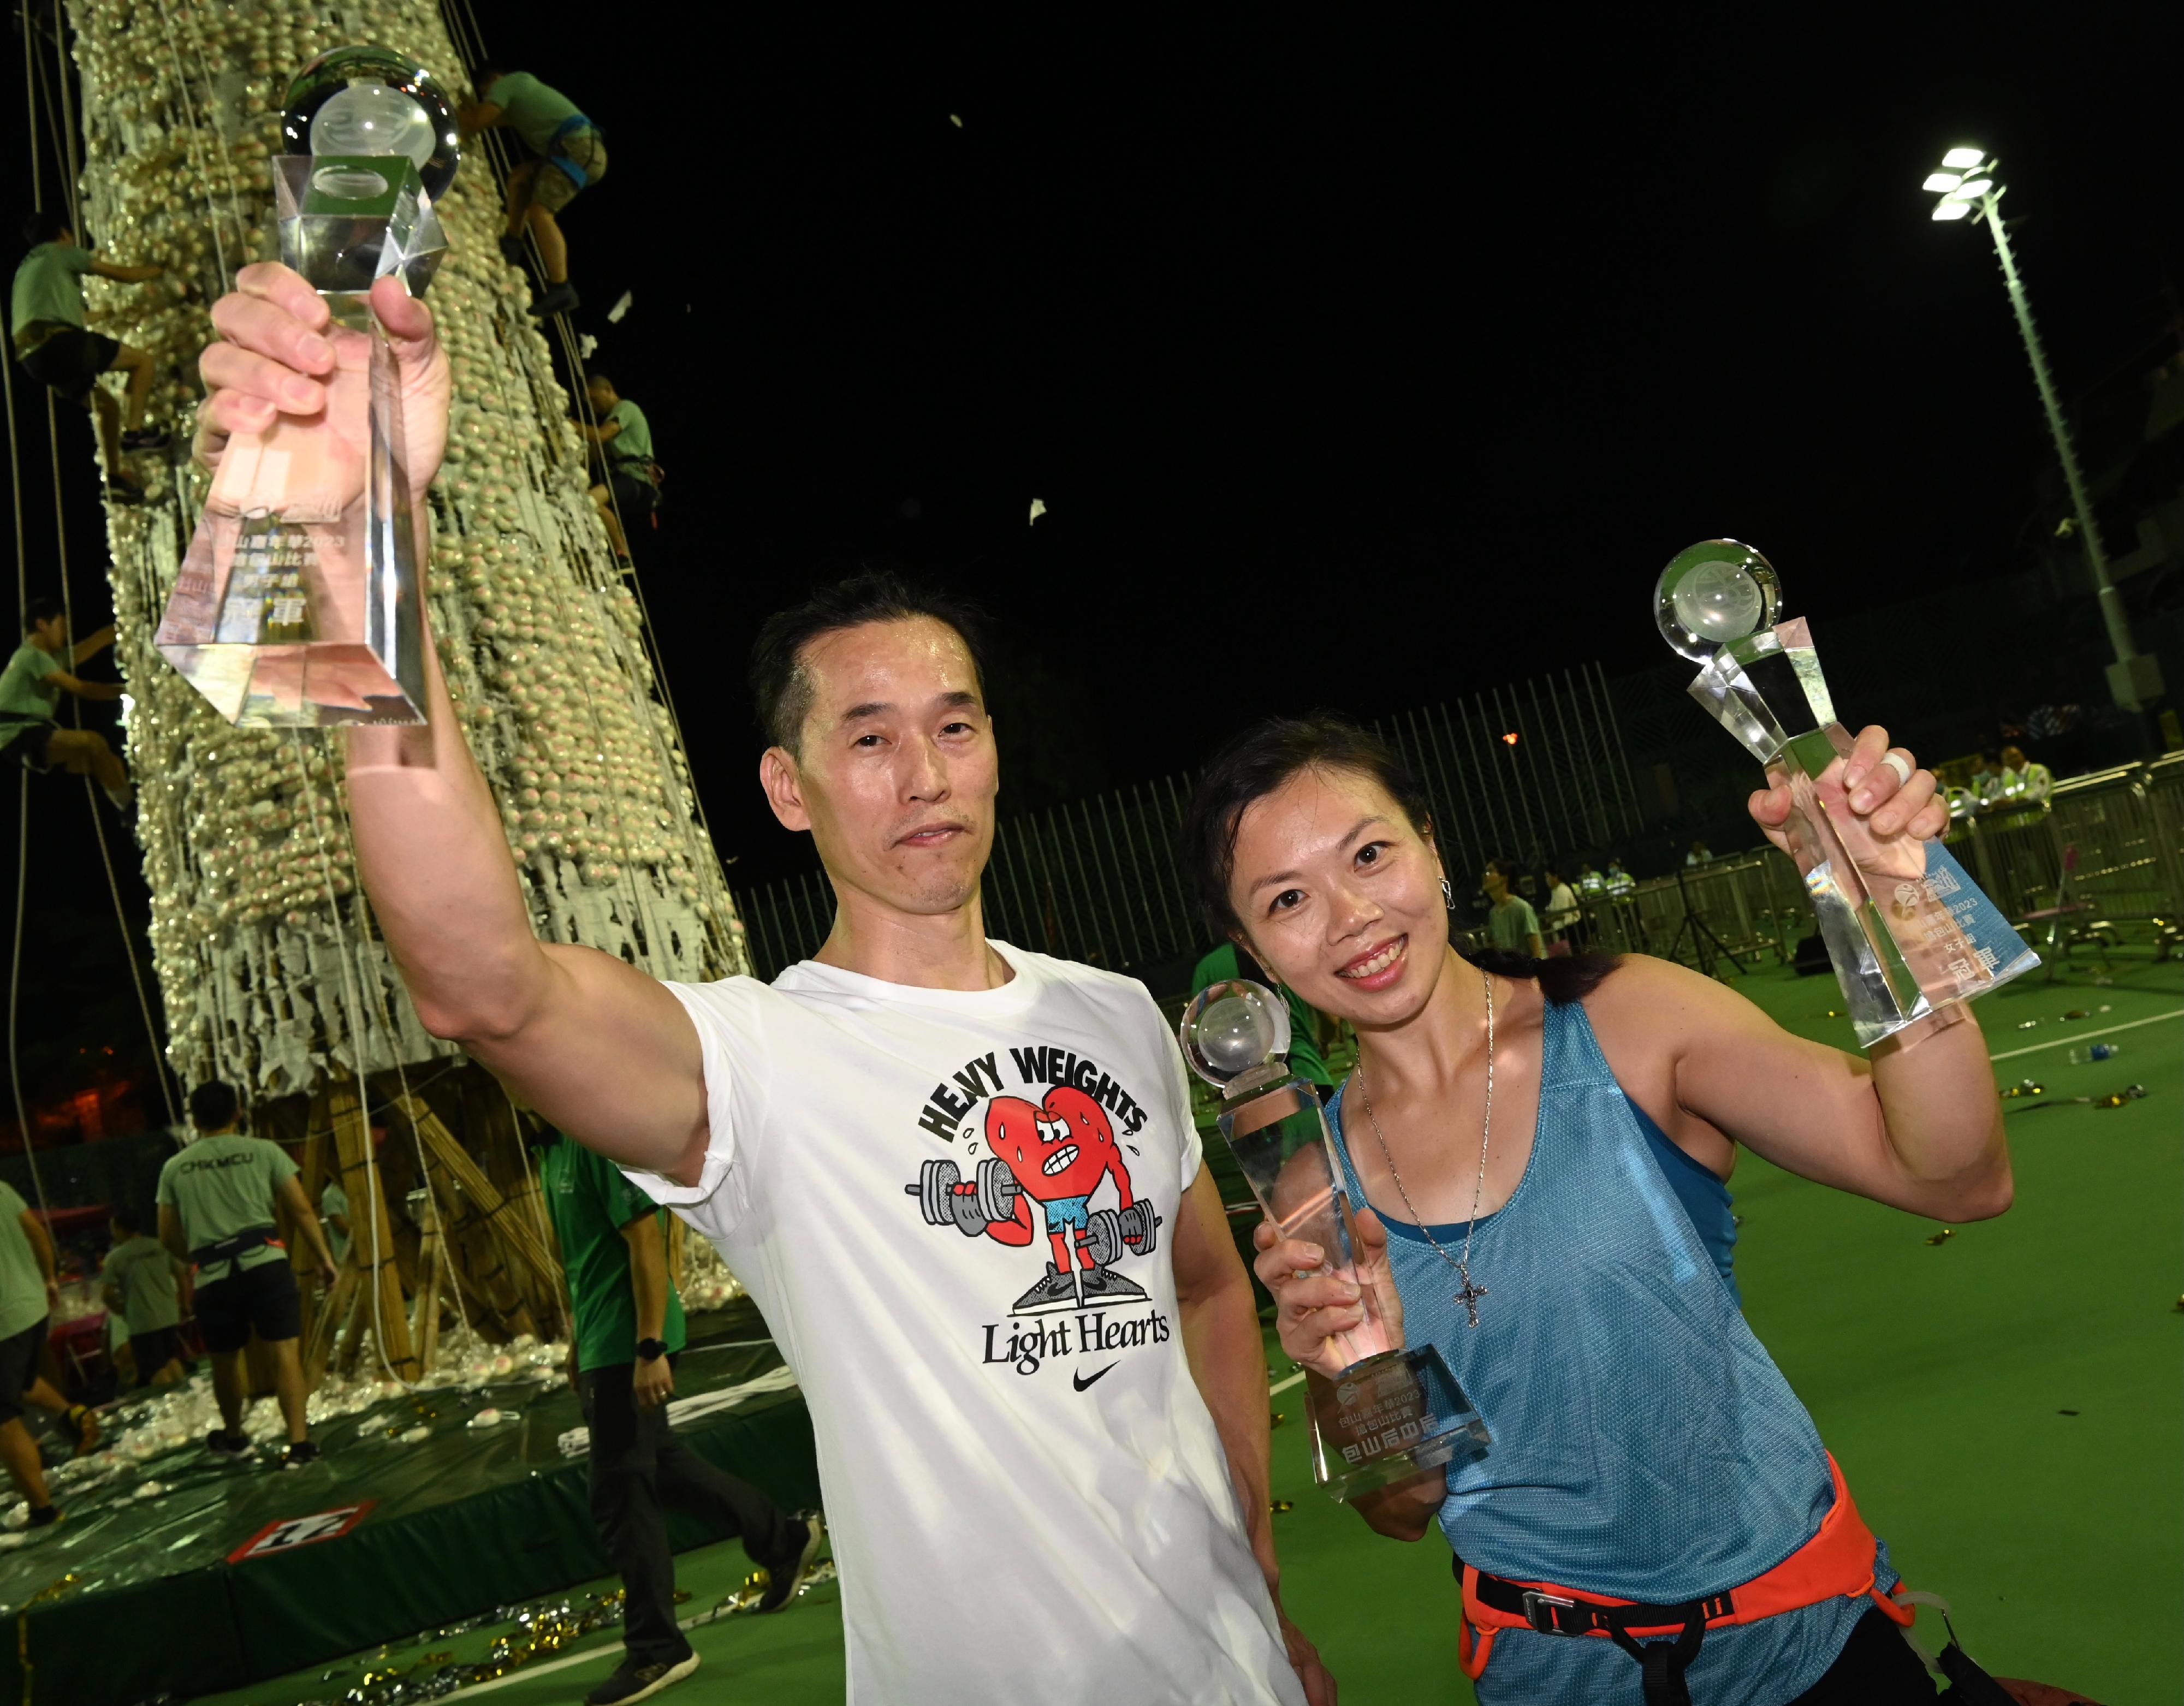 The Bun Scrambling Competition in Cheung Chau concluded early this morning (May 27). Chung Yuk-chuen (left) was the male champion and Wong Ka-yan (right) won the women's contest. Wong, who has been the champion three times in the women’s division since 2016, became the first "Queen of Queens" of the competition.